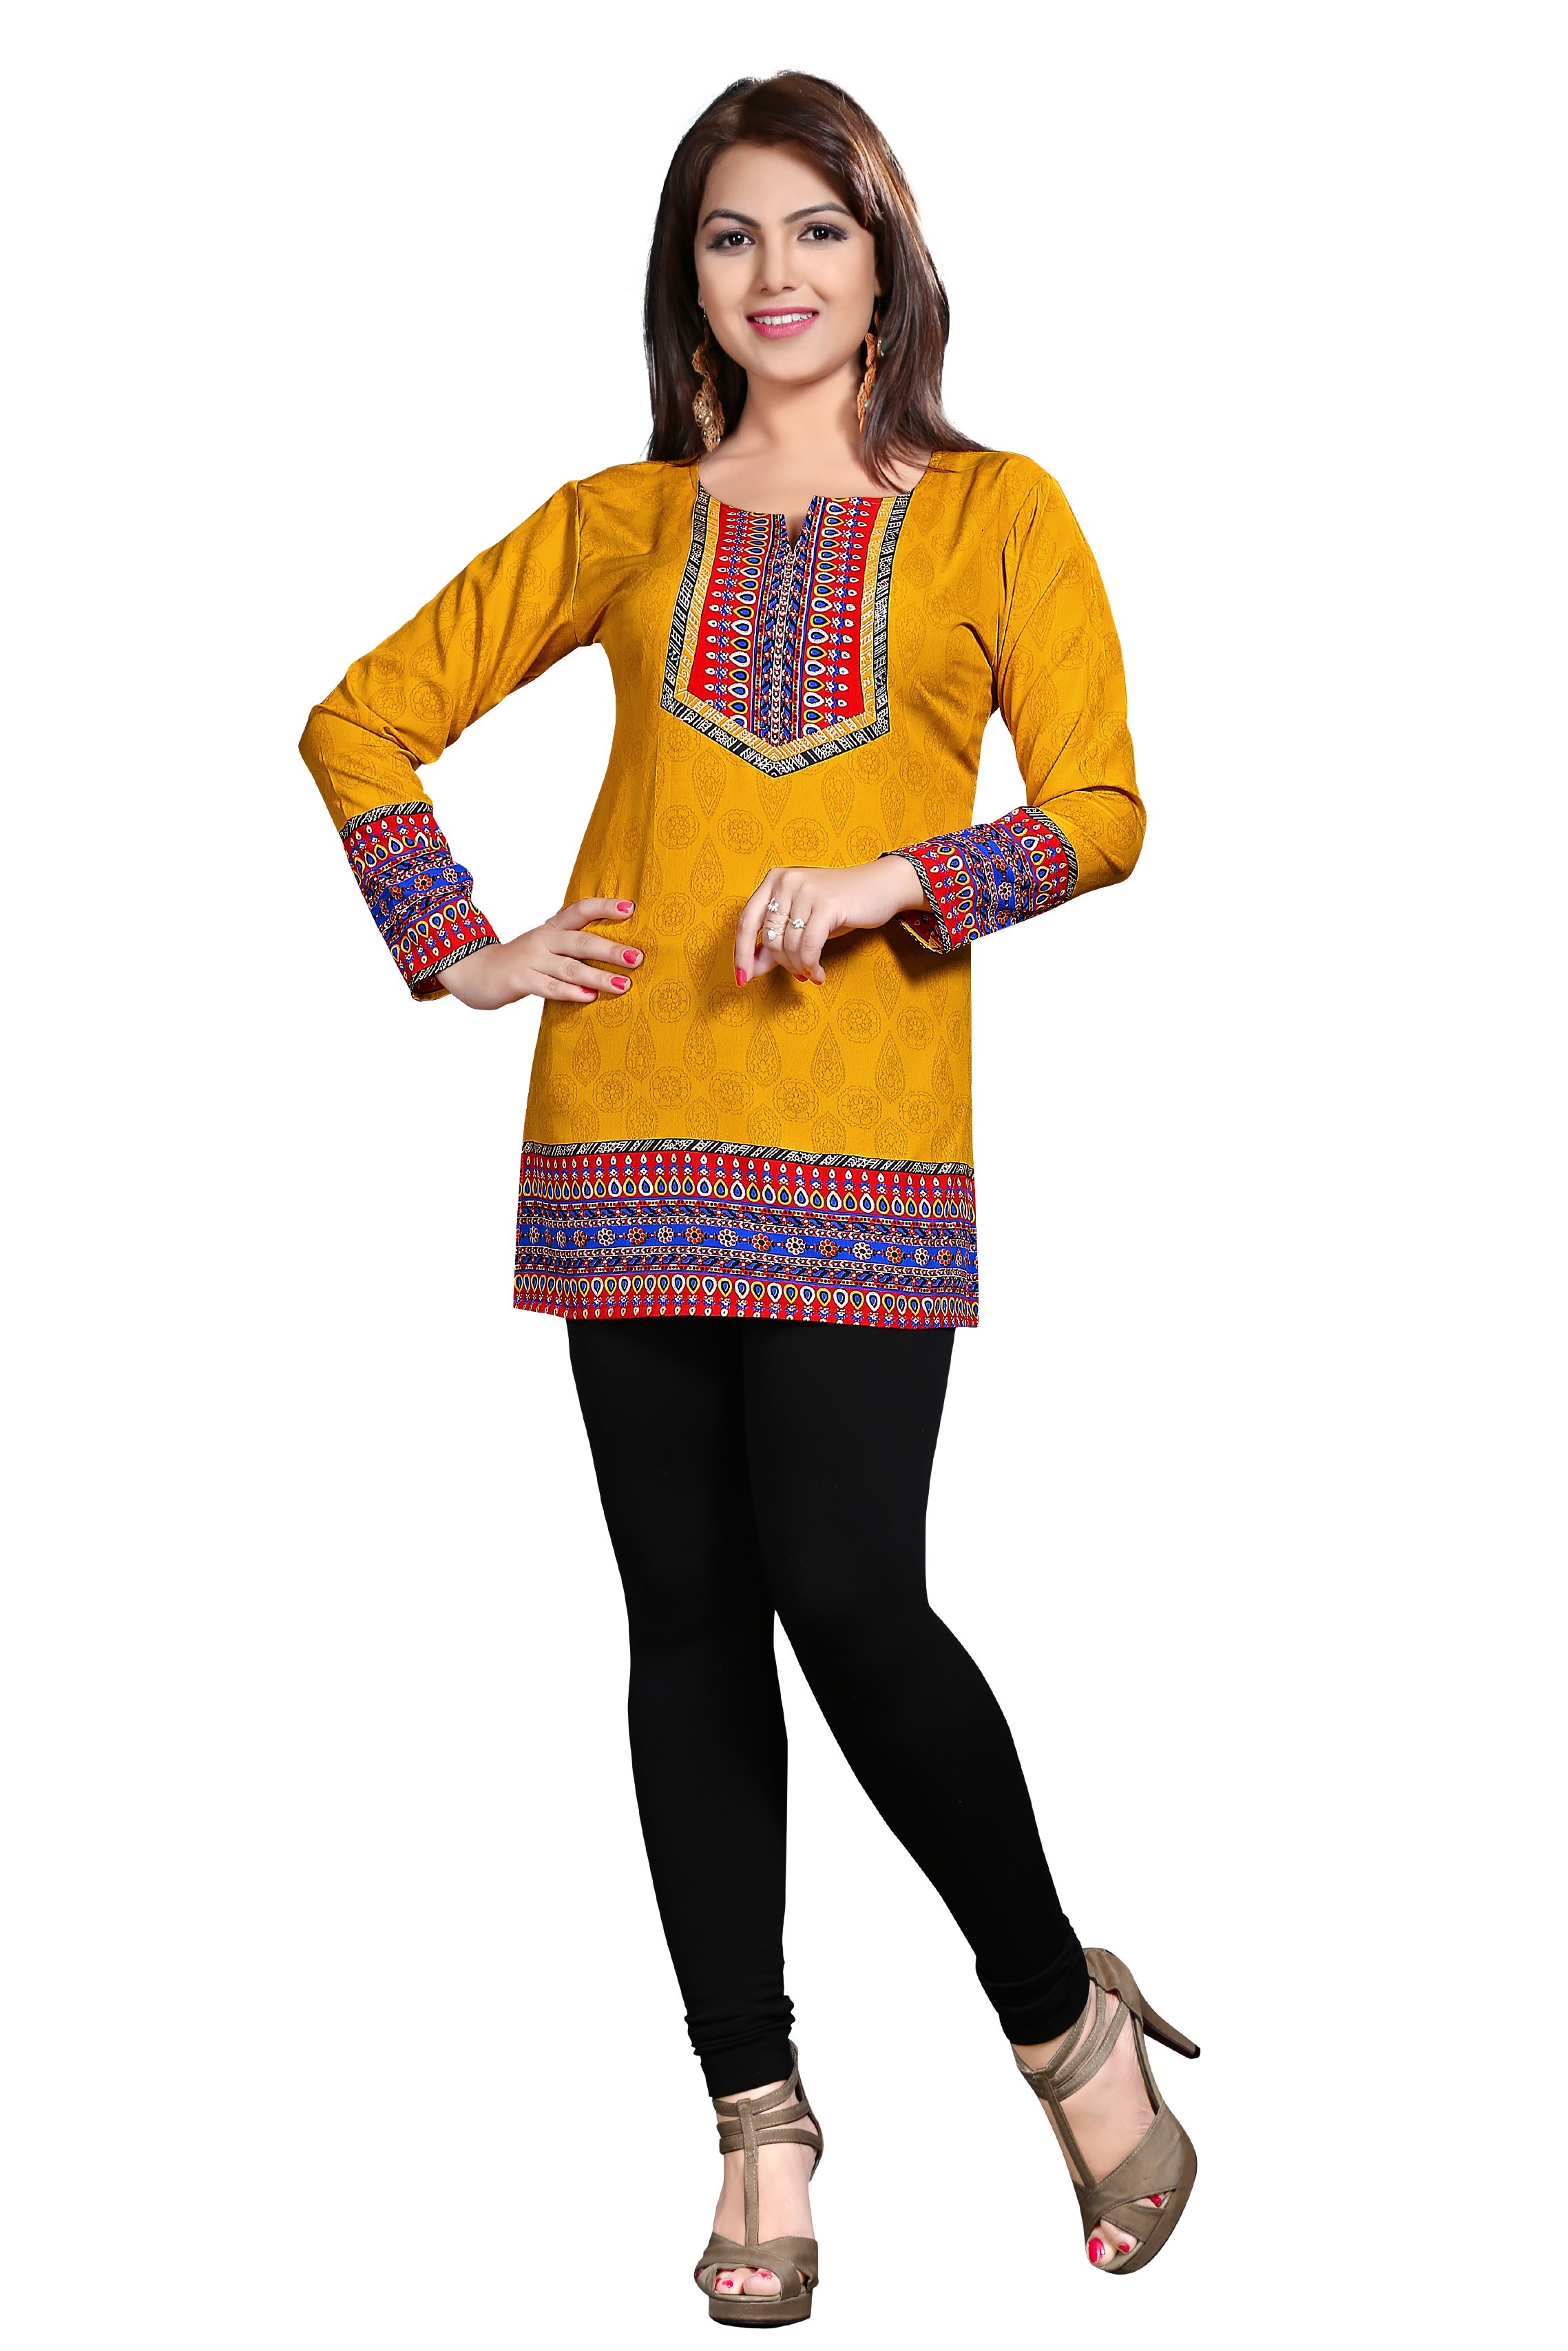 Yellow Hand Print Kurtis Online Shopping for Women at Low Prices